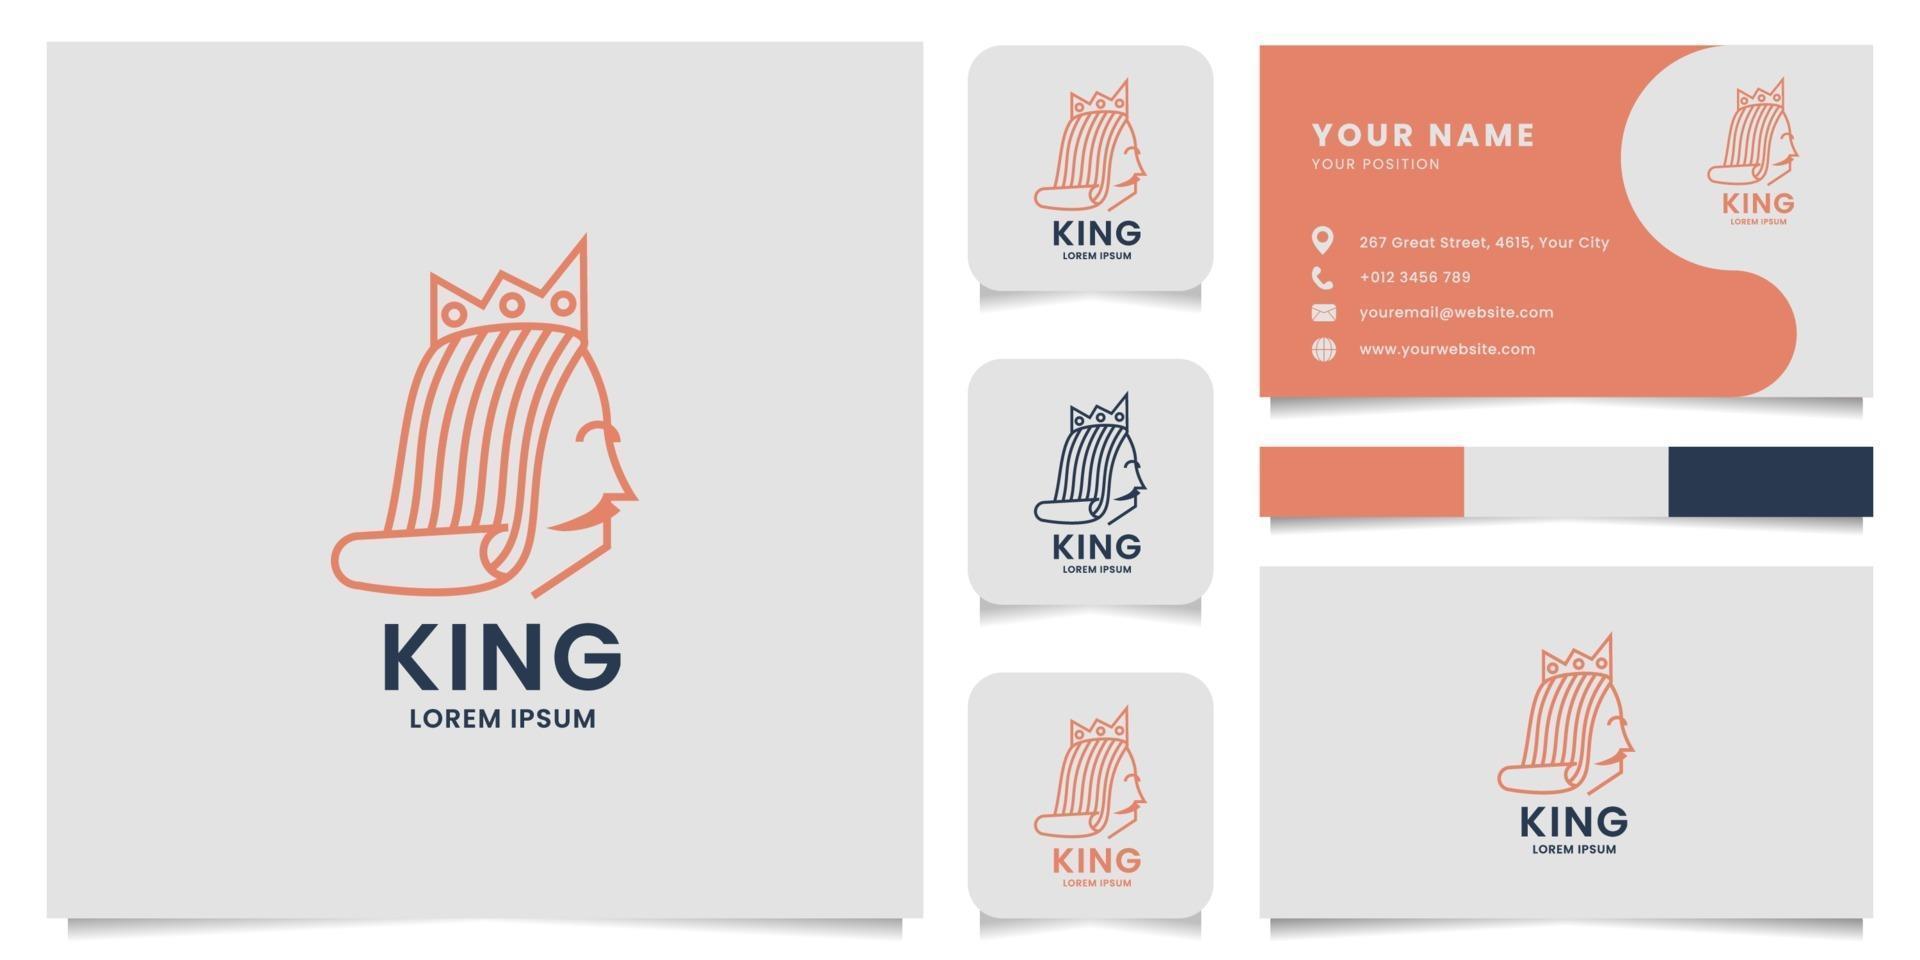 Line King Logo with Business Card Template vector